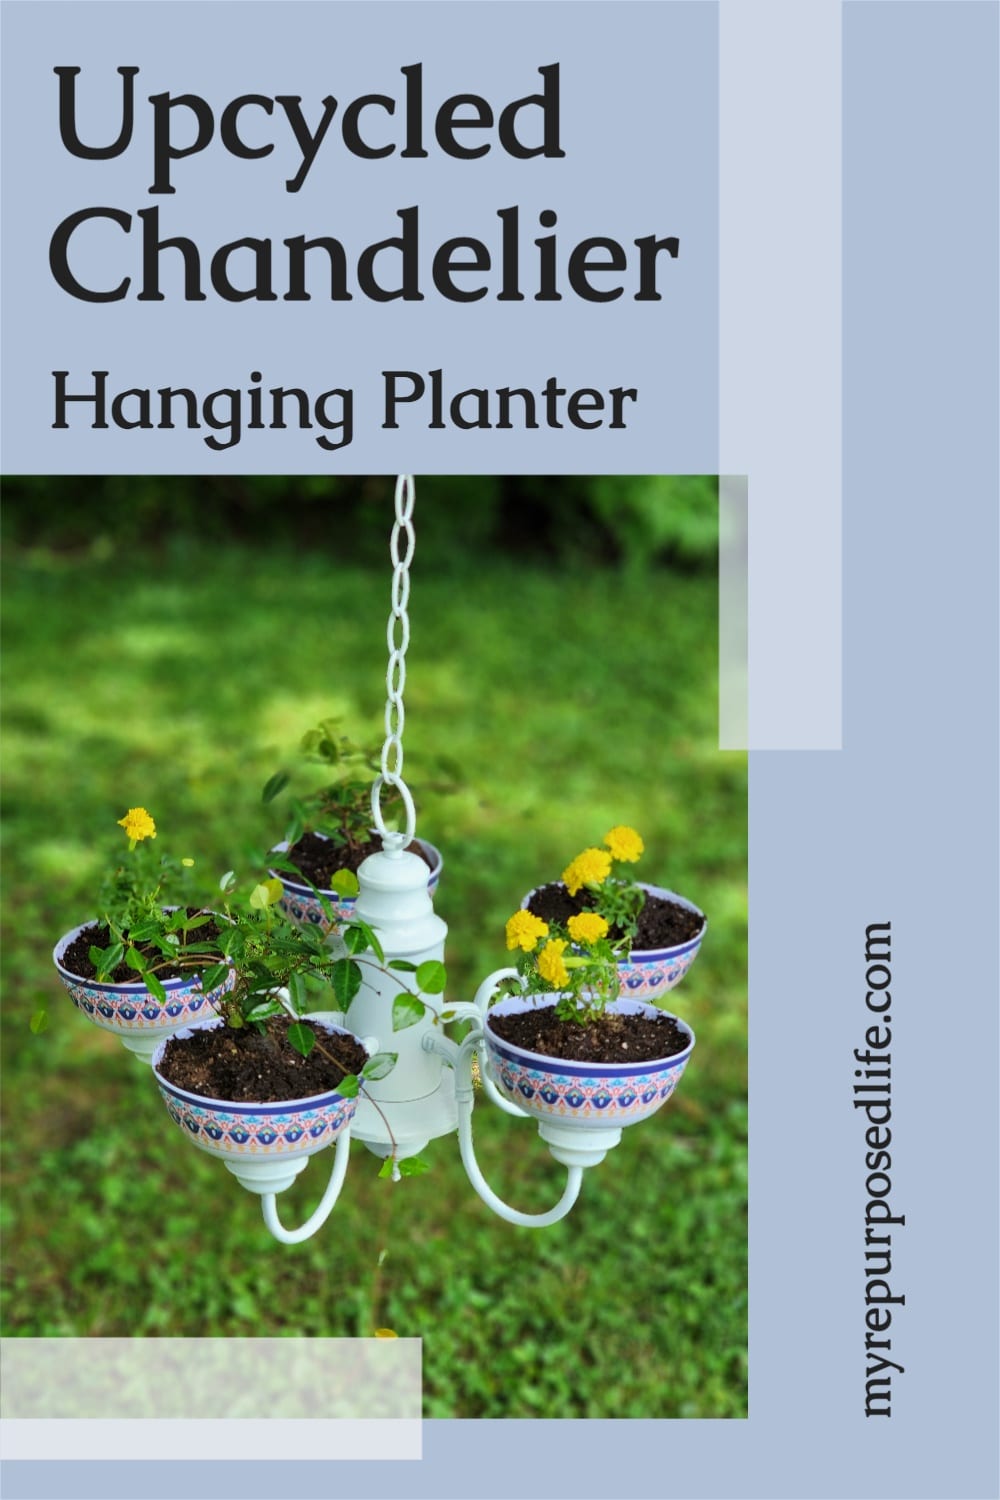 How to change up a thrift store find into a DIY planter chandelier. Lots of ideas here, plus other chandy projects. Bonus! More thrift store projects included. #MyRepurposedLife #upcycle #chandelier #planter via @repurposedlife